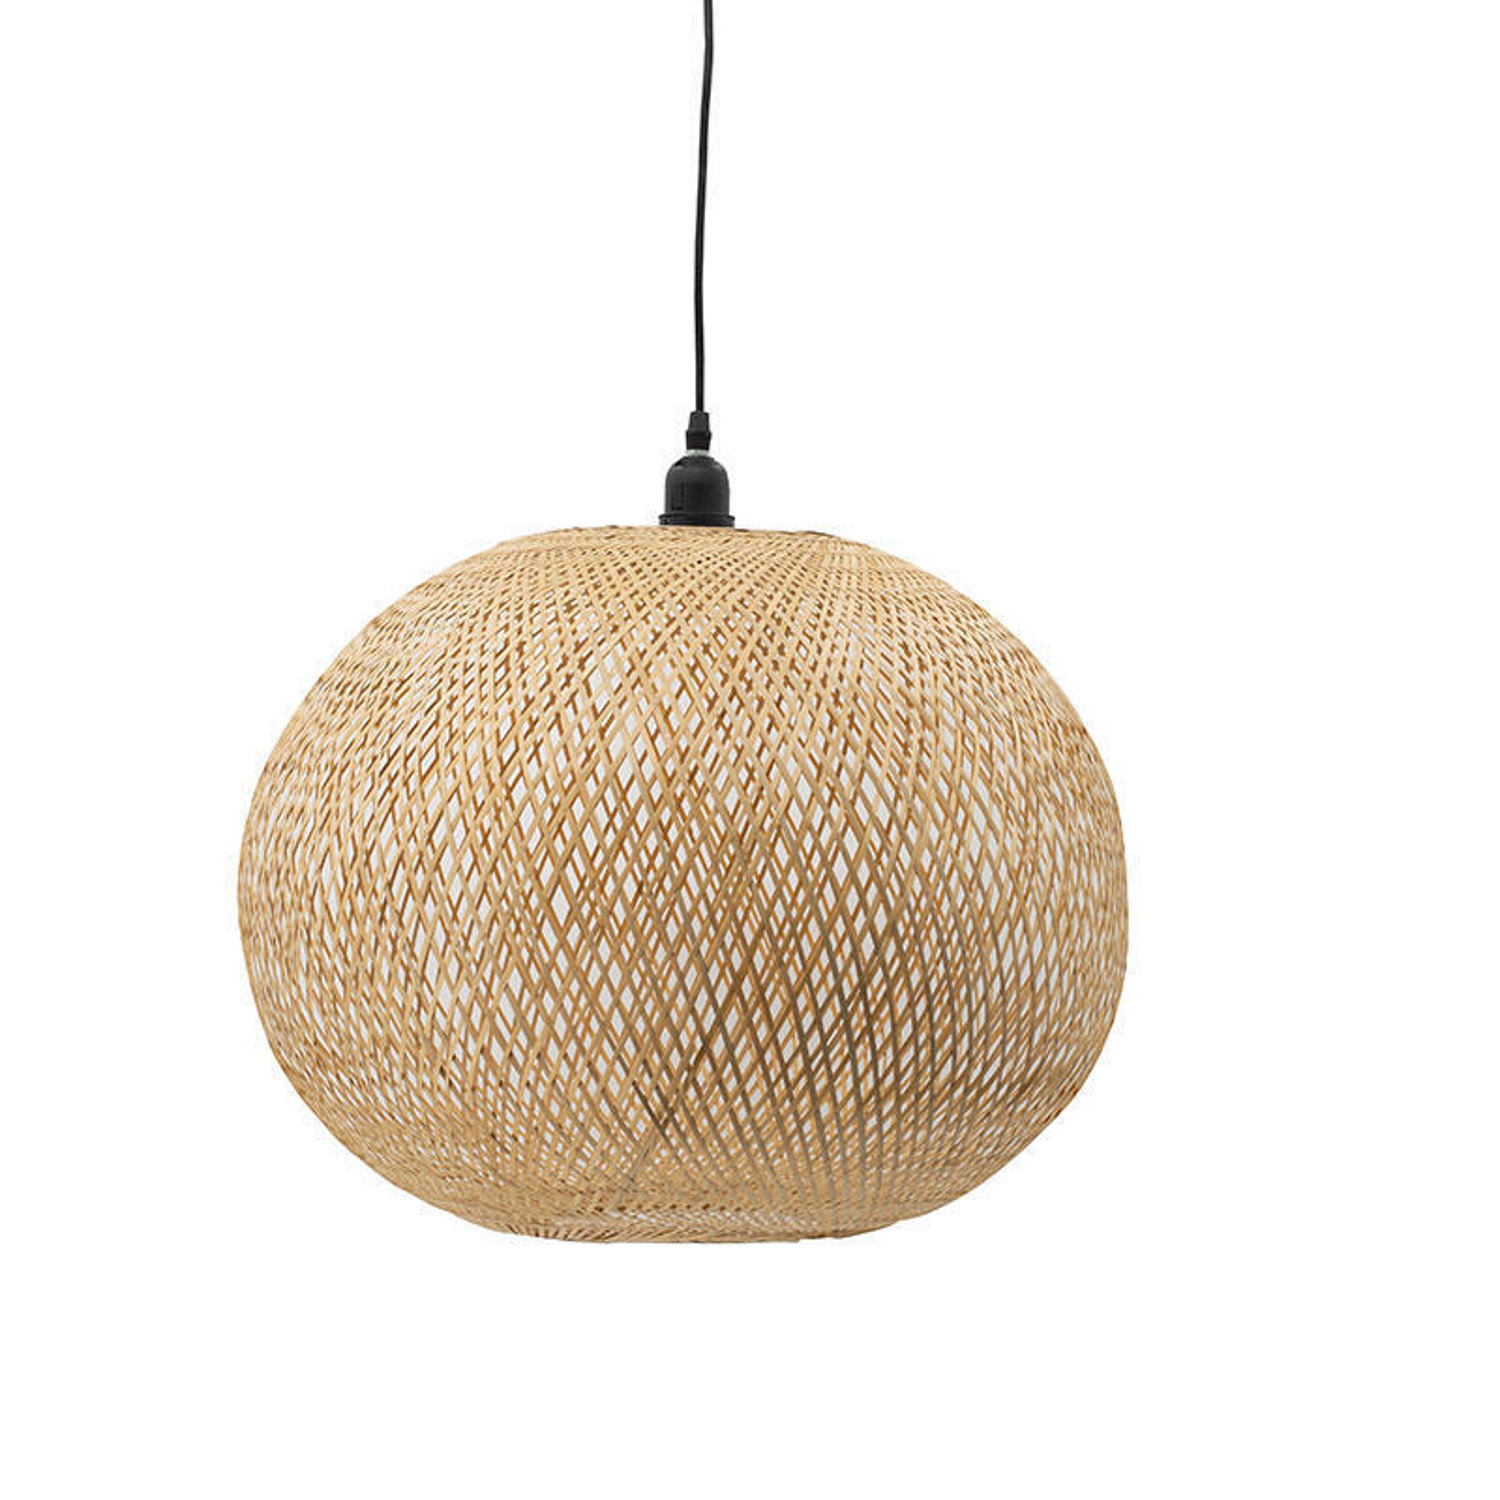 Primary image for Scratch & Dent Mid-Century Modern Style Round Woven Bamboo Wooden Pendant Lamp